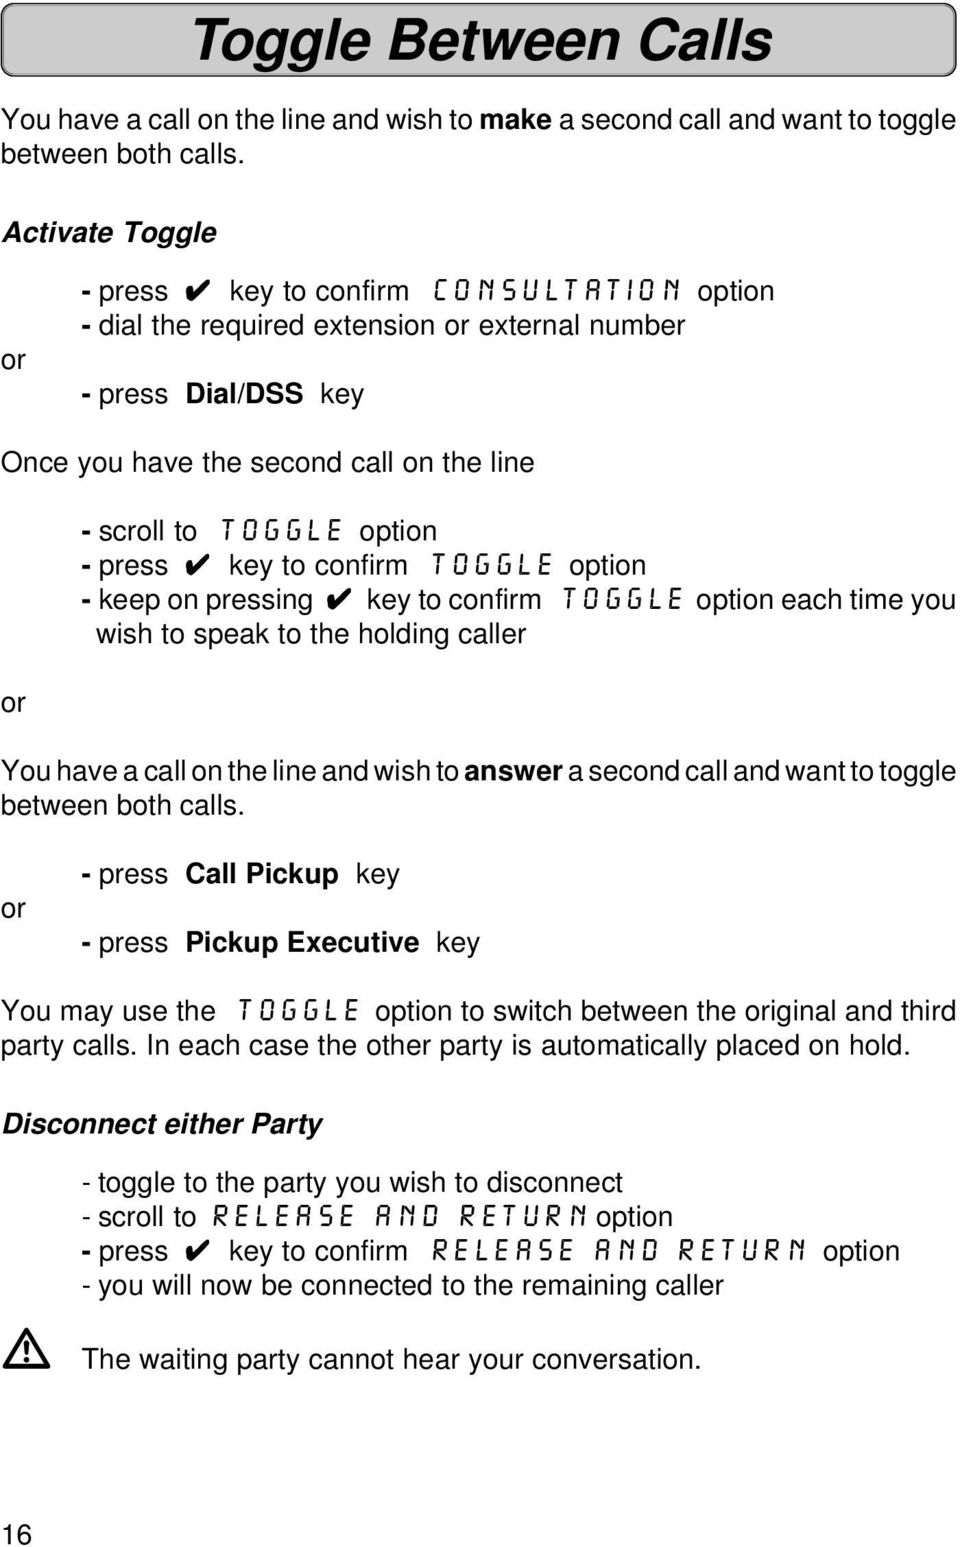 option - press key to confirm Toggle option - keep on pressing key to confirm Toggle option each time you wish to speak to the holding caller You have a call on the line and wish to answer a second